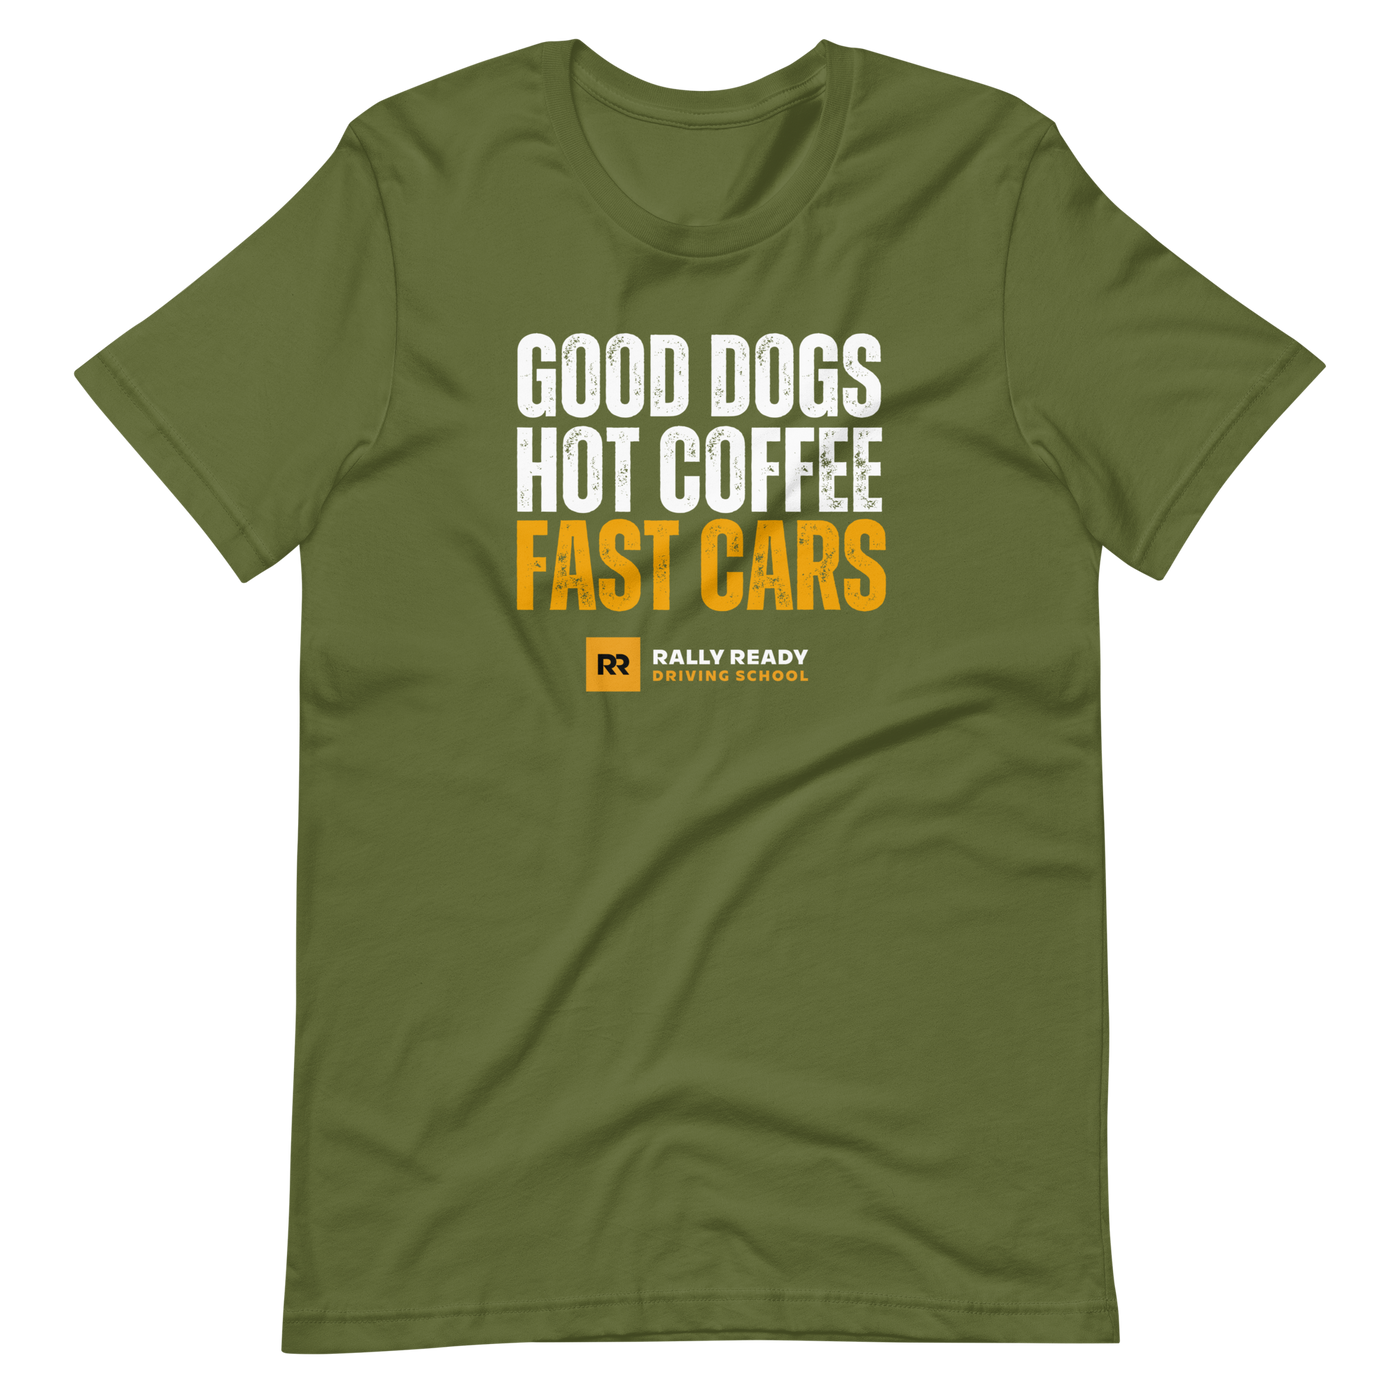 Good Dogs, Hot Coffee, Fast Cars T-Shirt